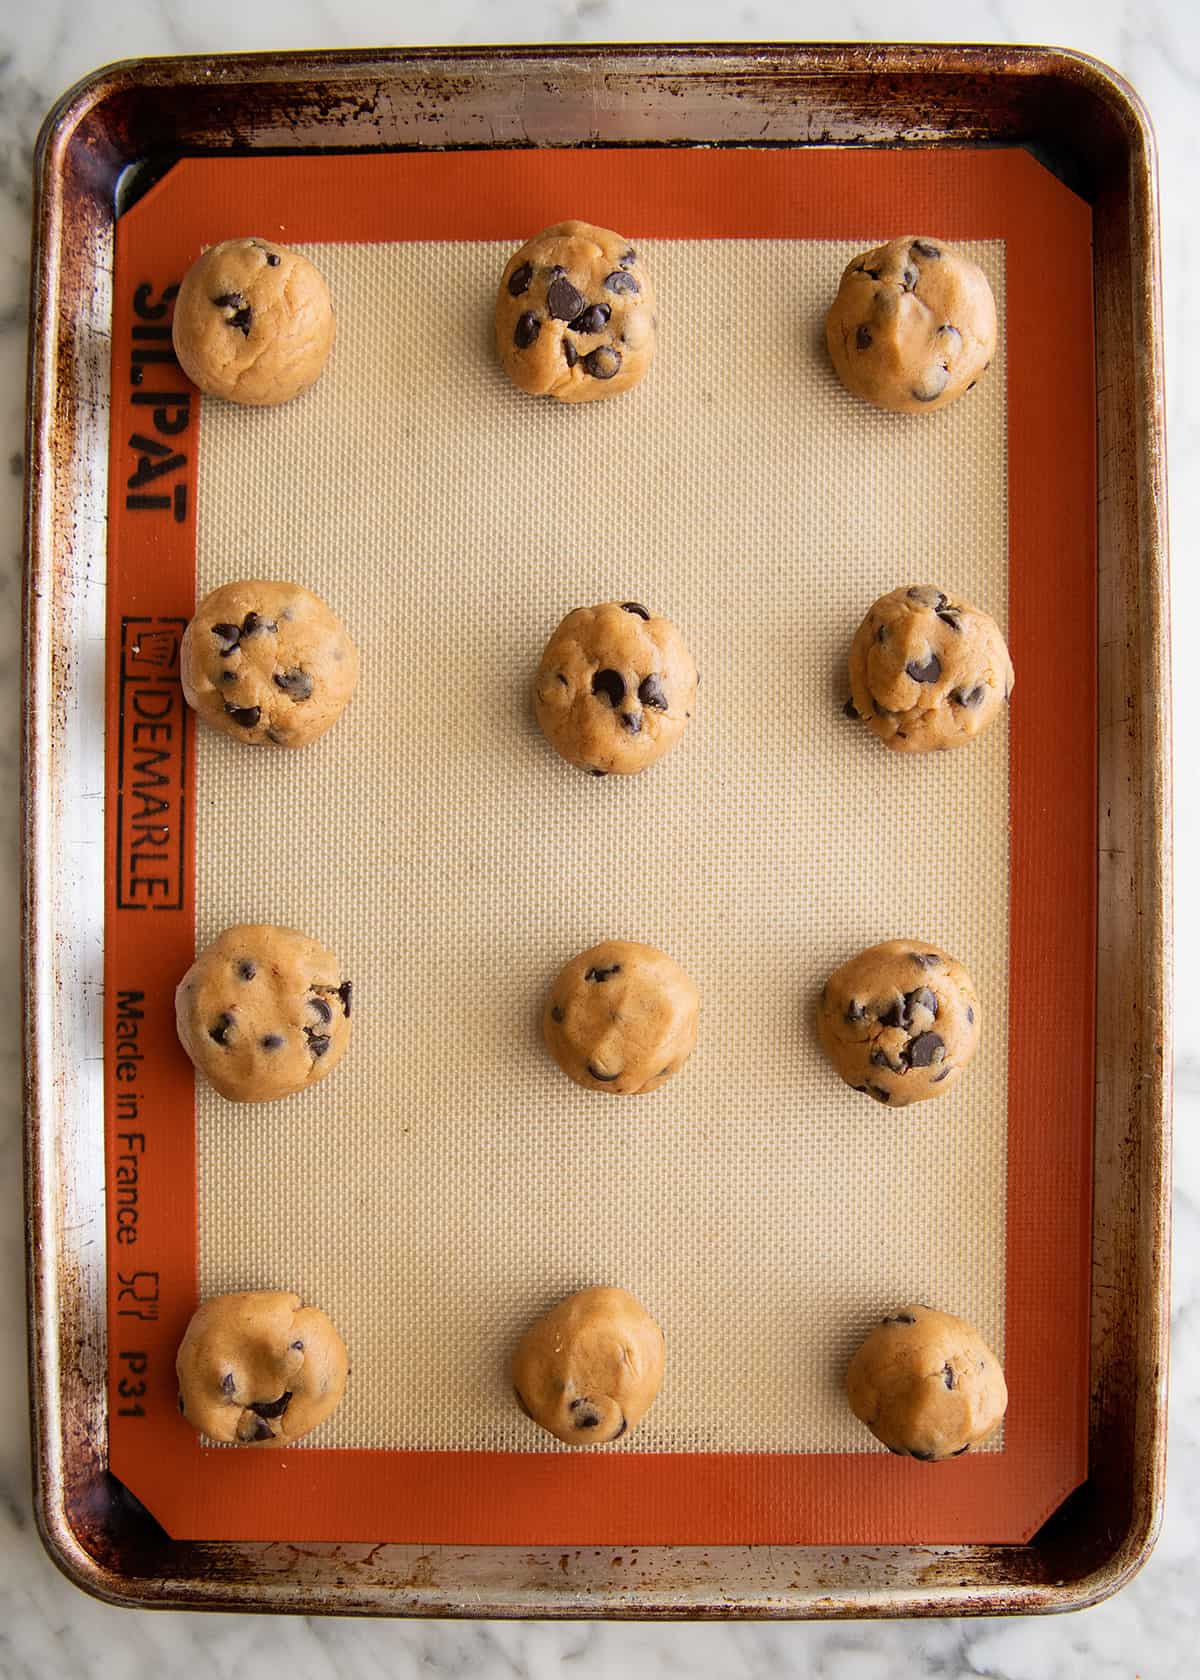 Peanut Butter Chocolate Chip Cookies on a baking sheet before being baked